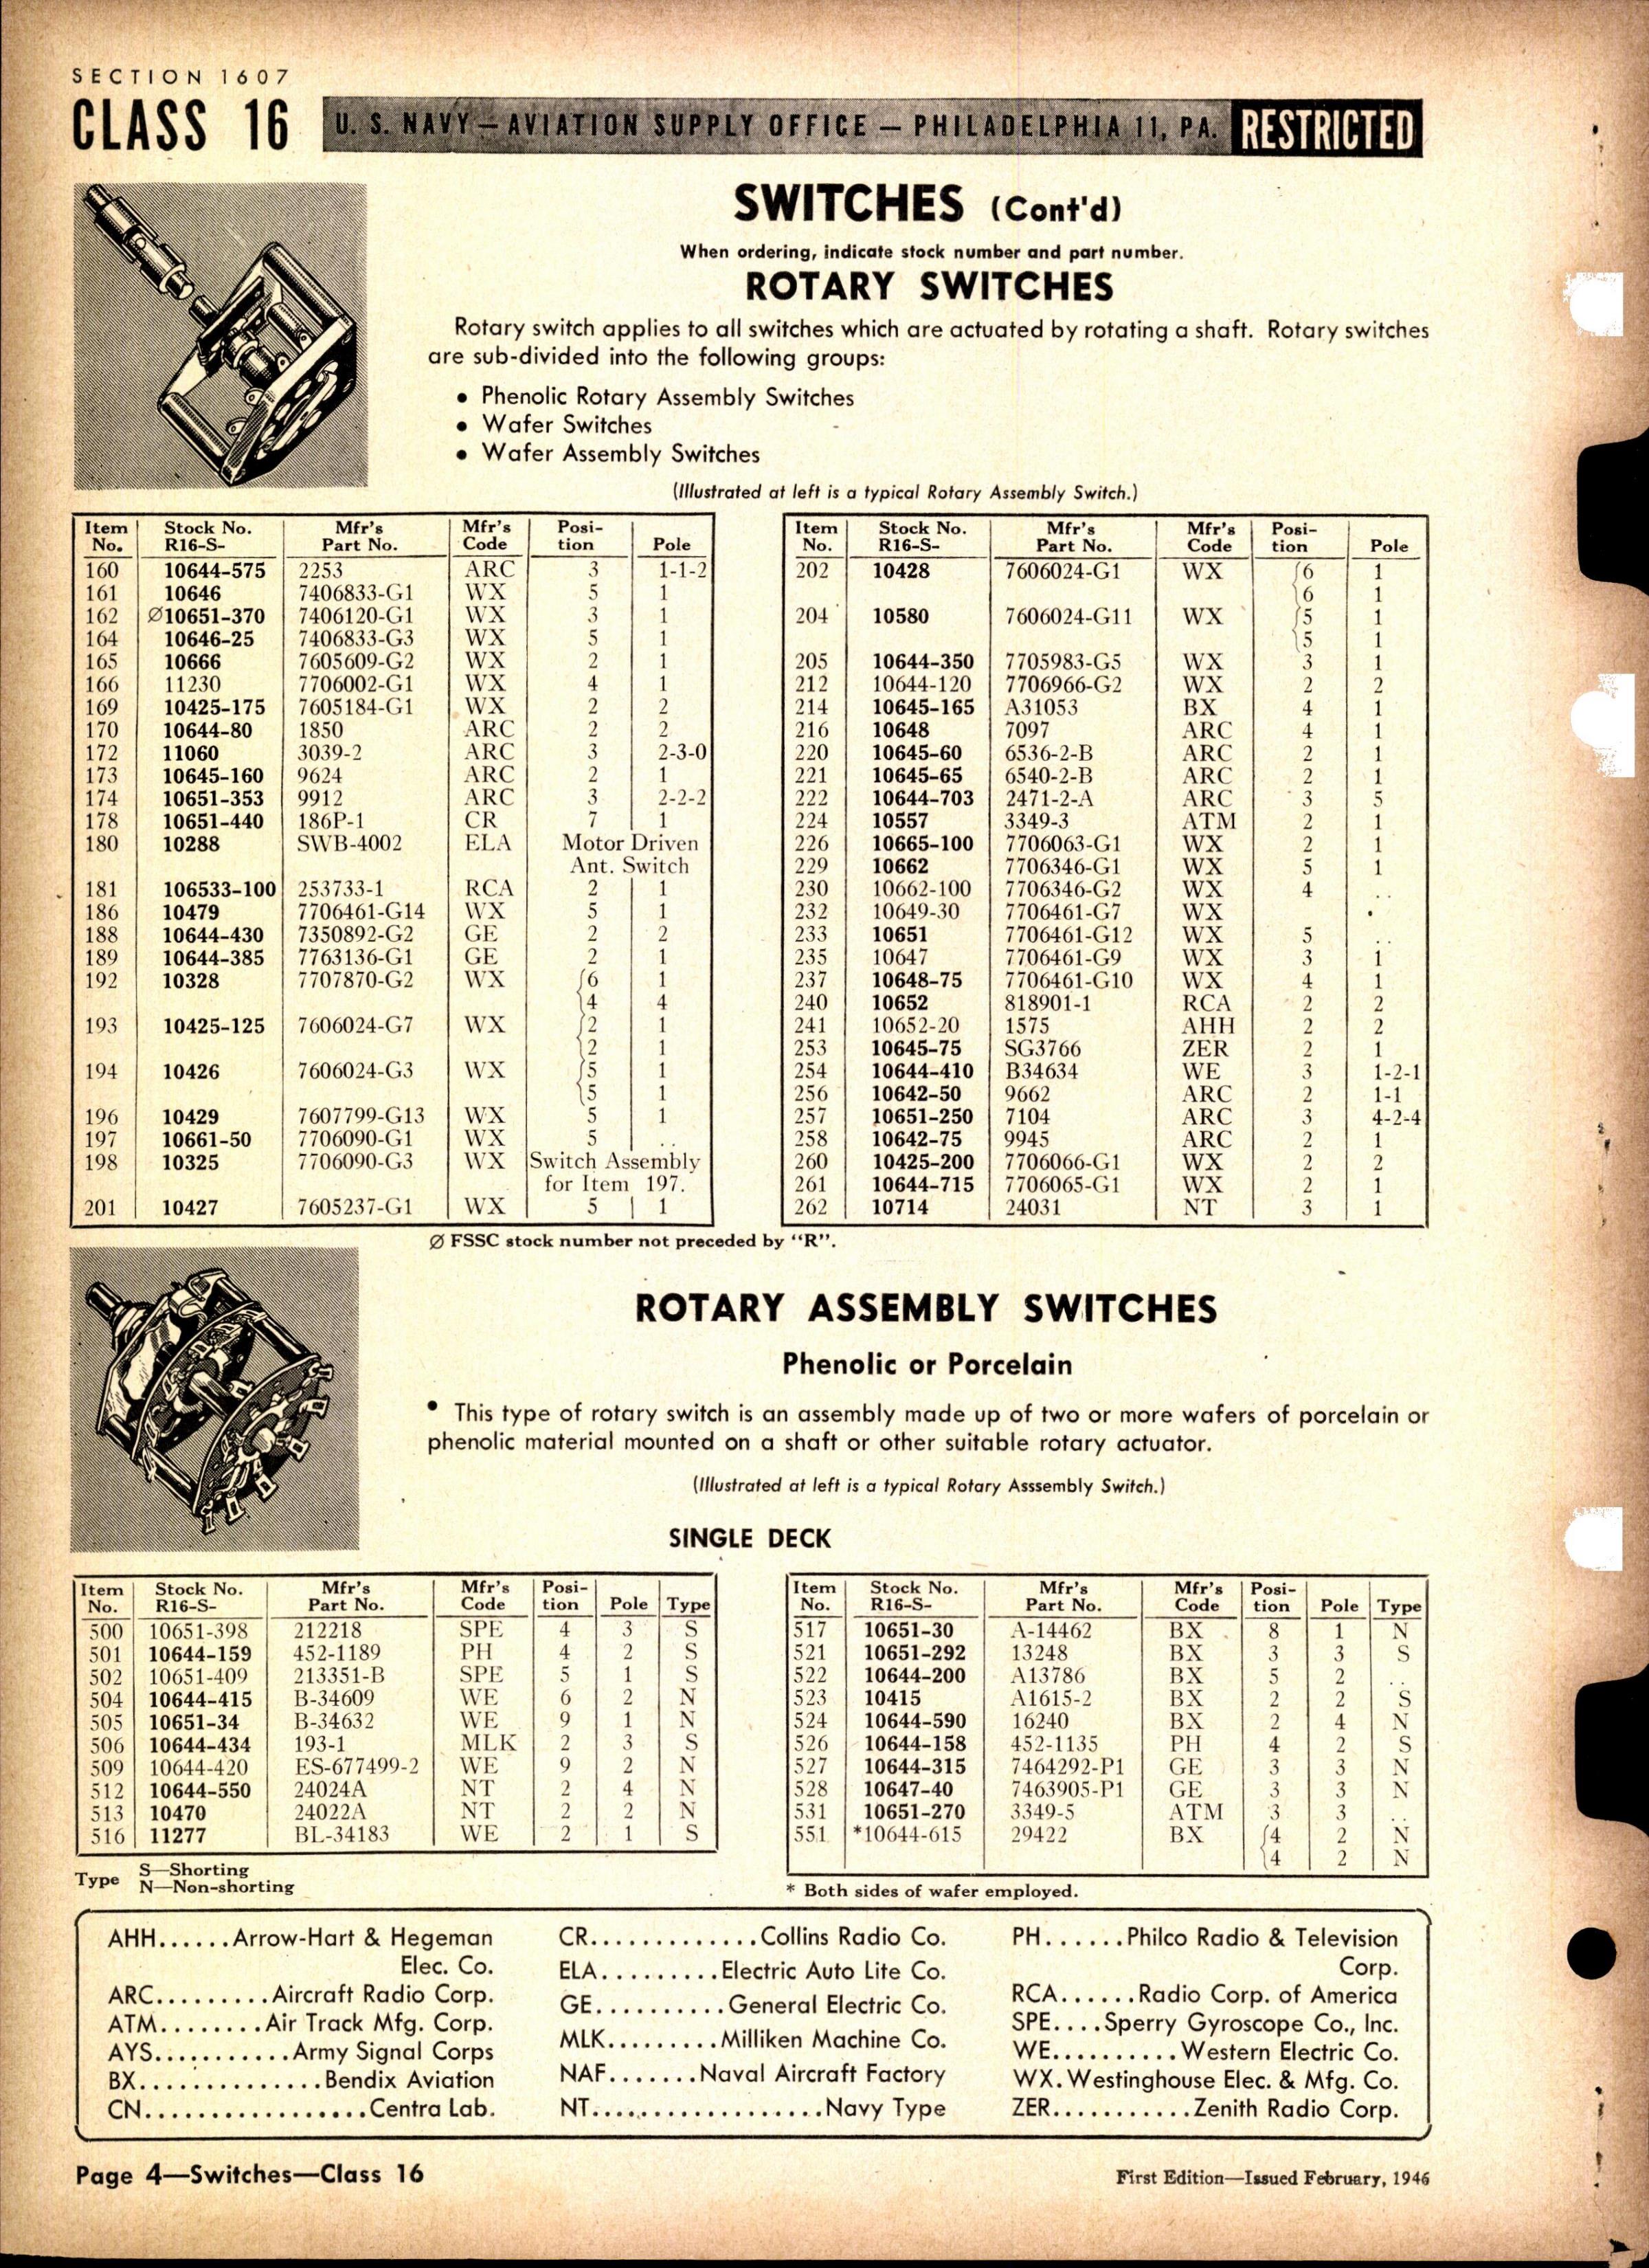 Sample page 4 from AirCorps Library document: Switches: Toggle, Rotary, Vacuum, Leaf Spring, Interlock, Link